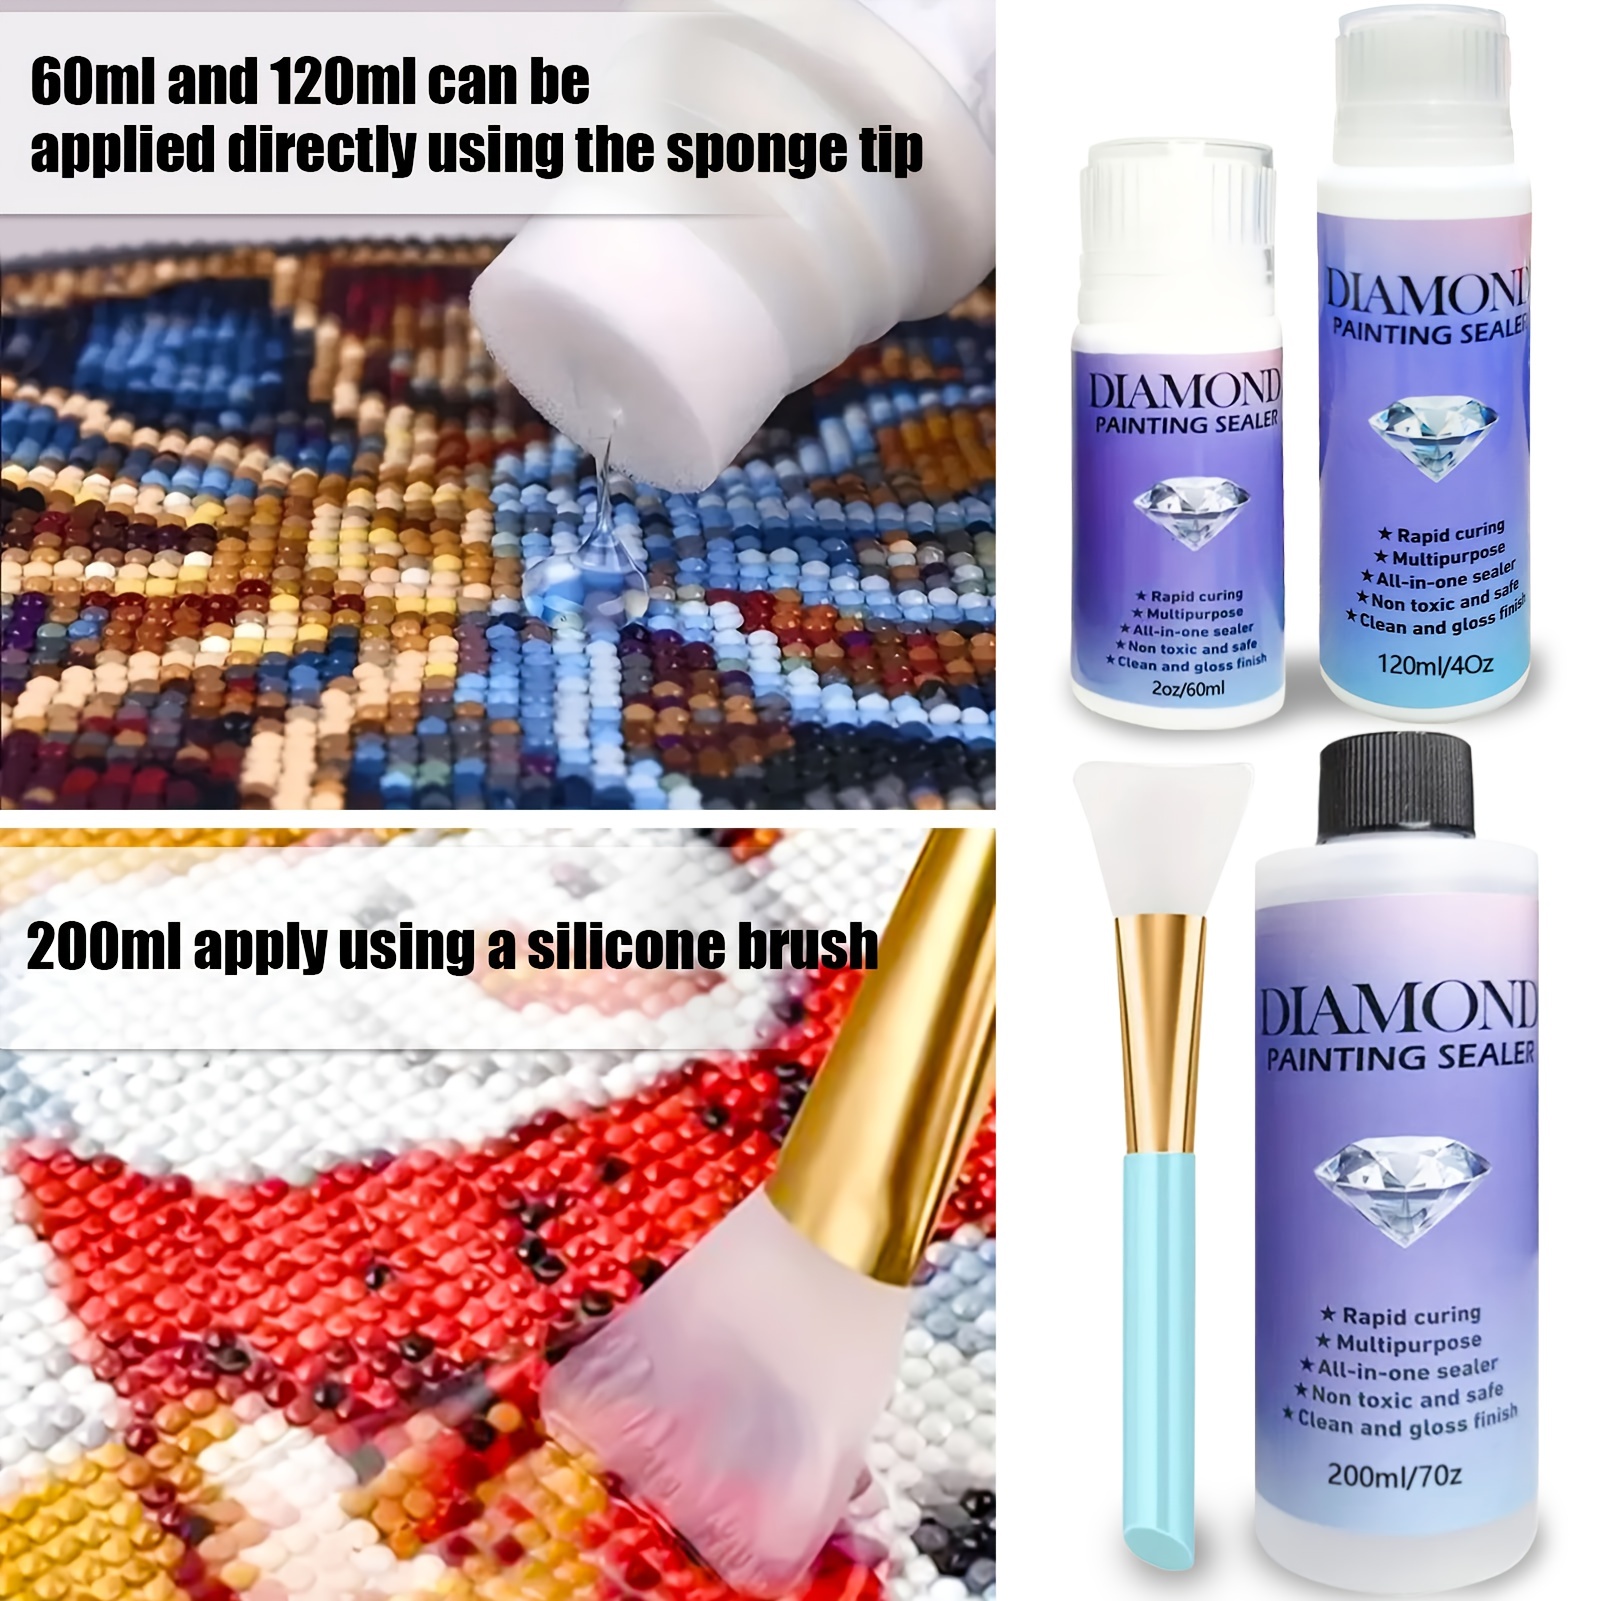 Eitseued Upgraded Diamond Painting Sealer Kits 400ML with Brushes,5D  Diamond Painting Glue Permanent Hold & Shine Accessories for Diamond  Painting and